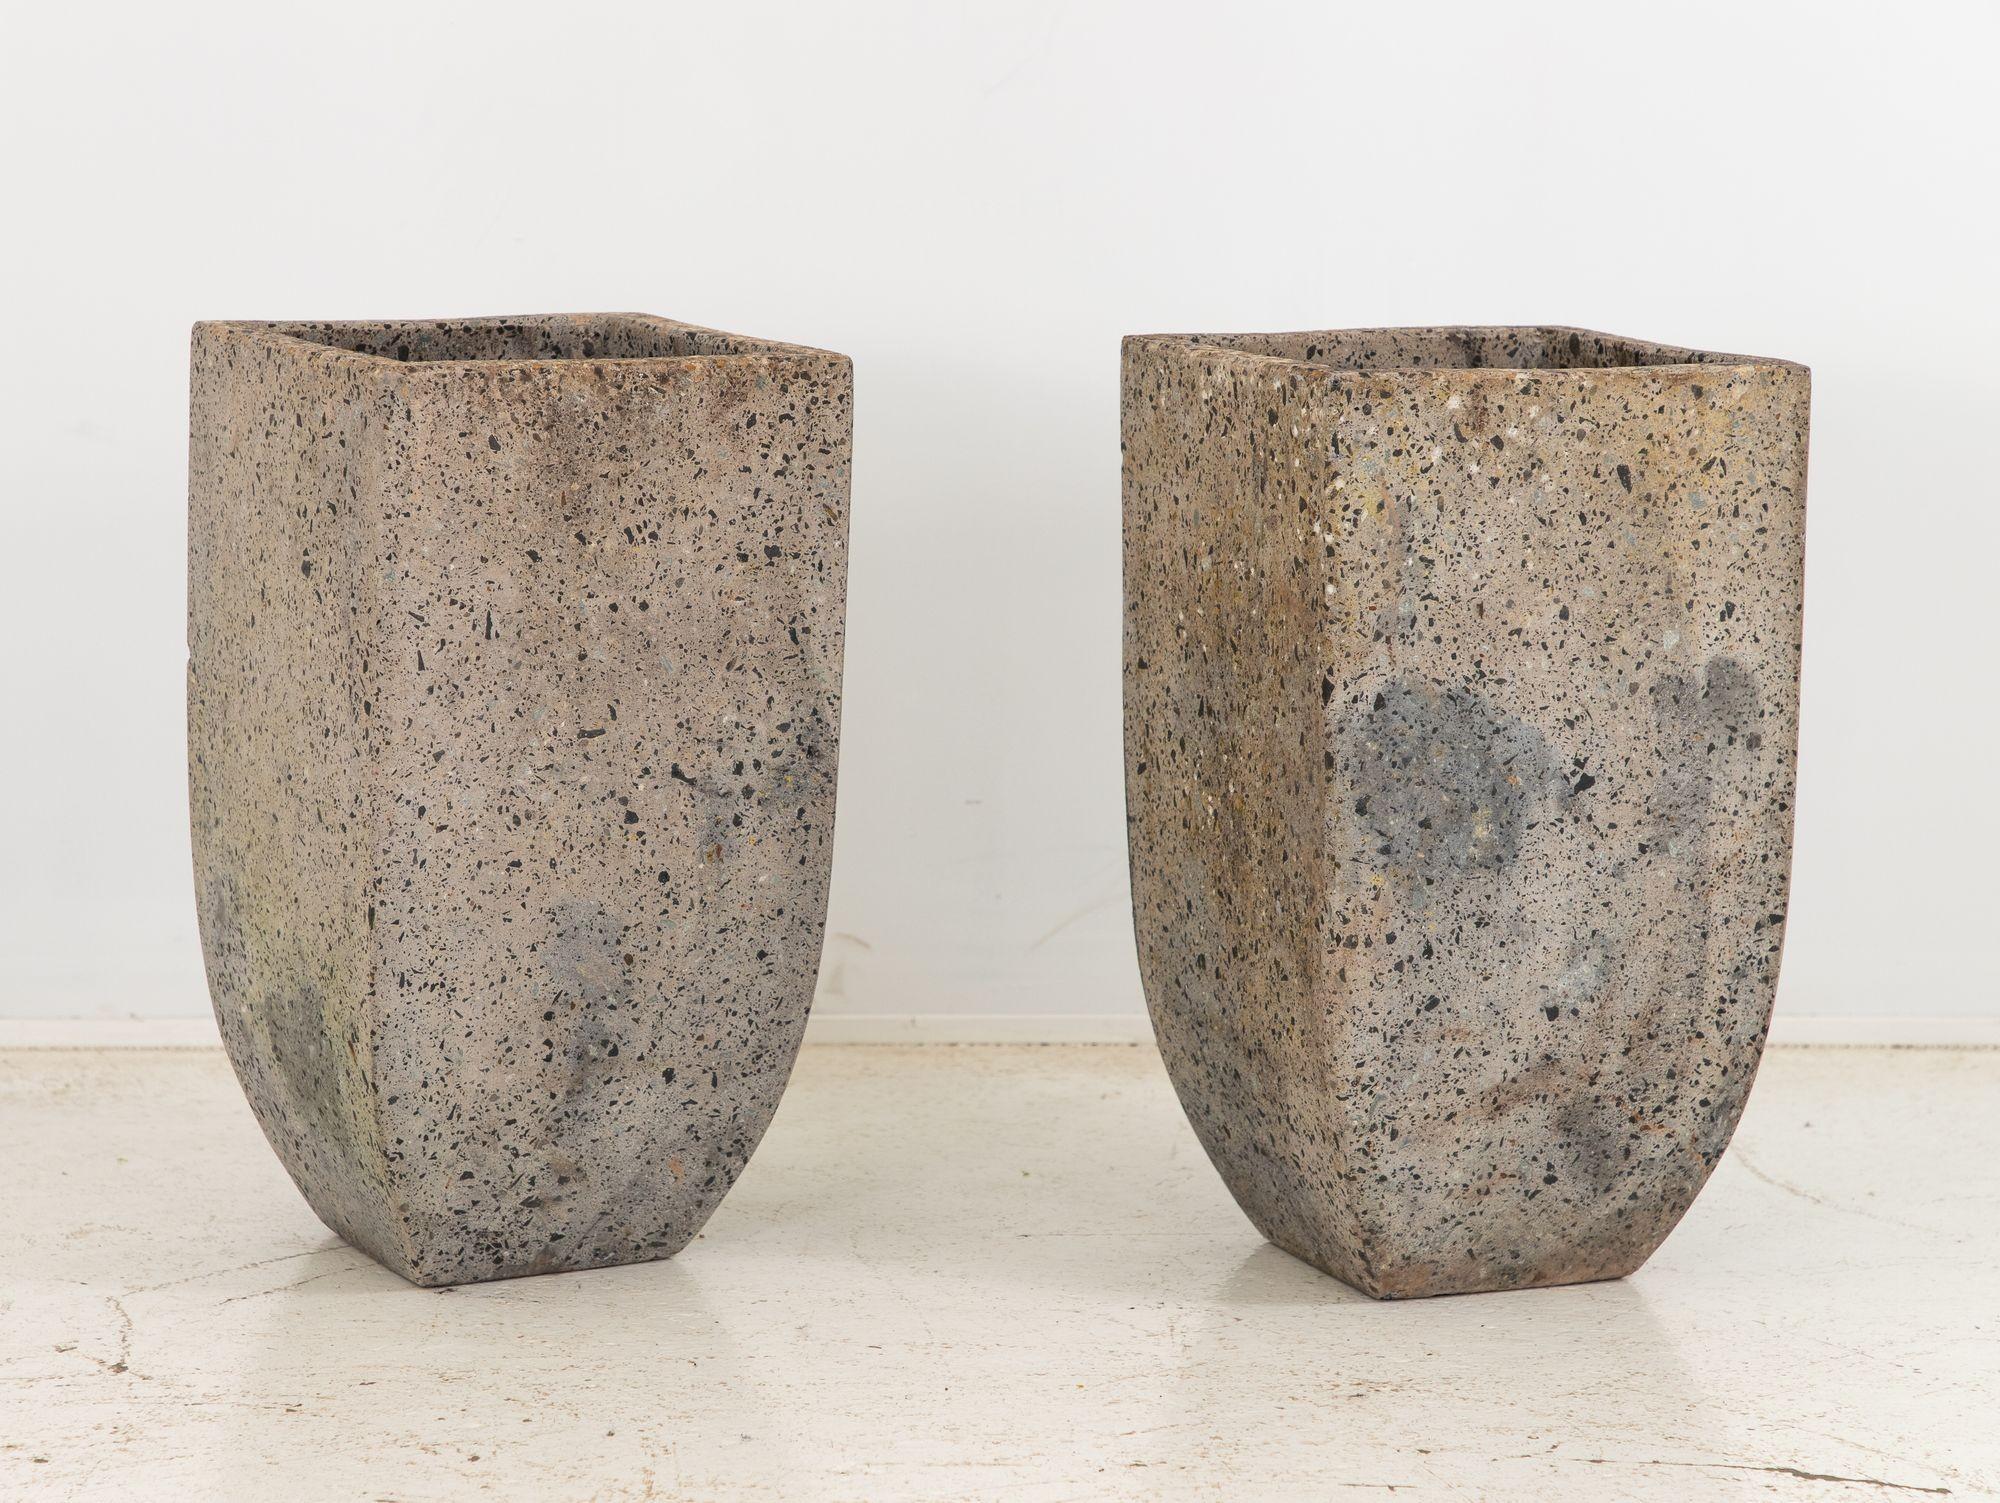 This striking pair of large planters draws inspiration from the bold aesthetics of Brutalist design. Crafted with a fusion of mixed stone and concrete, these planters showcase a rugged yet refined appeal. The raw textures and irregular shapes evoke